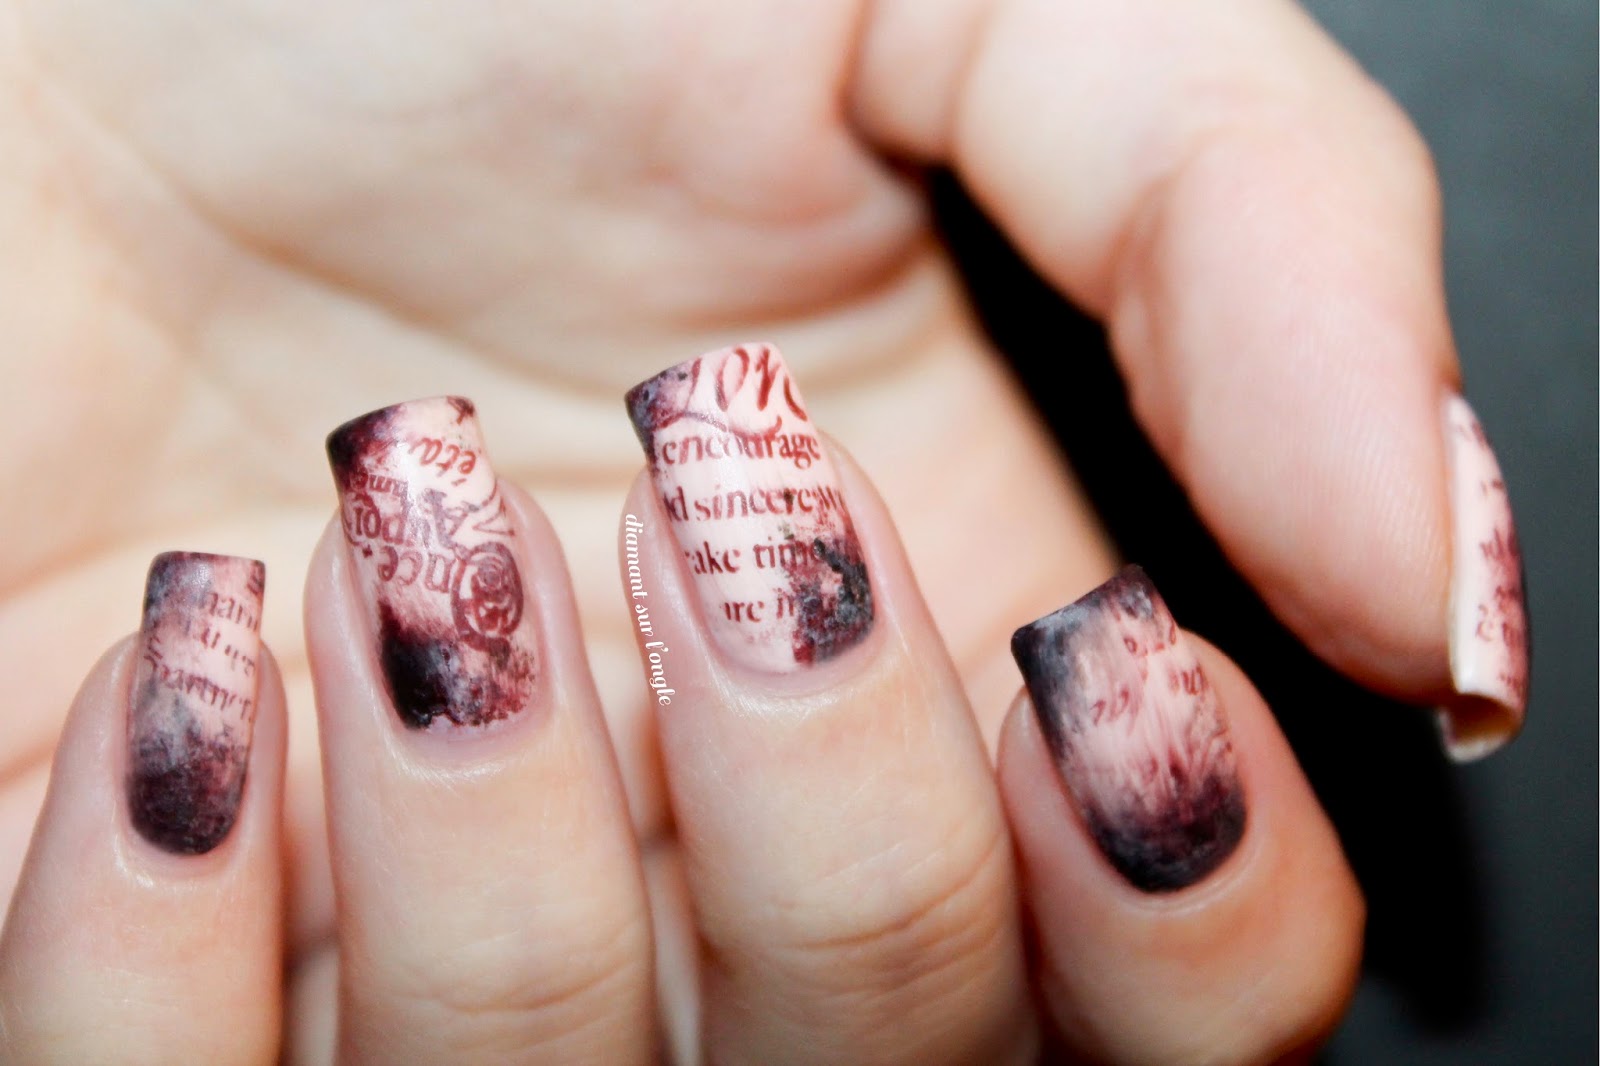 Old book page's nail art